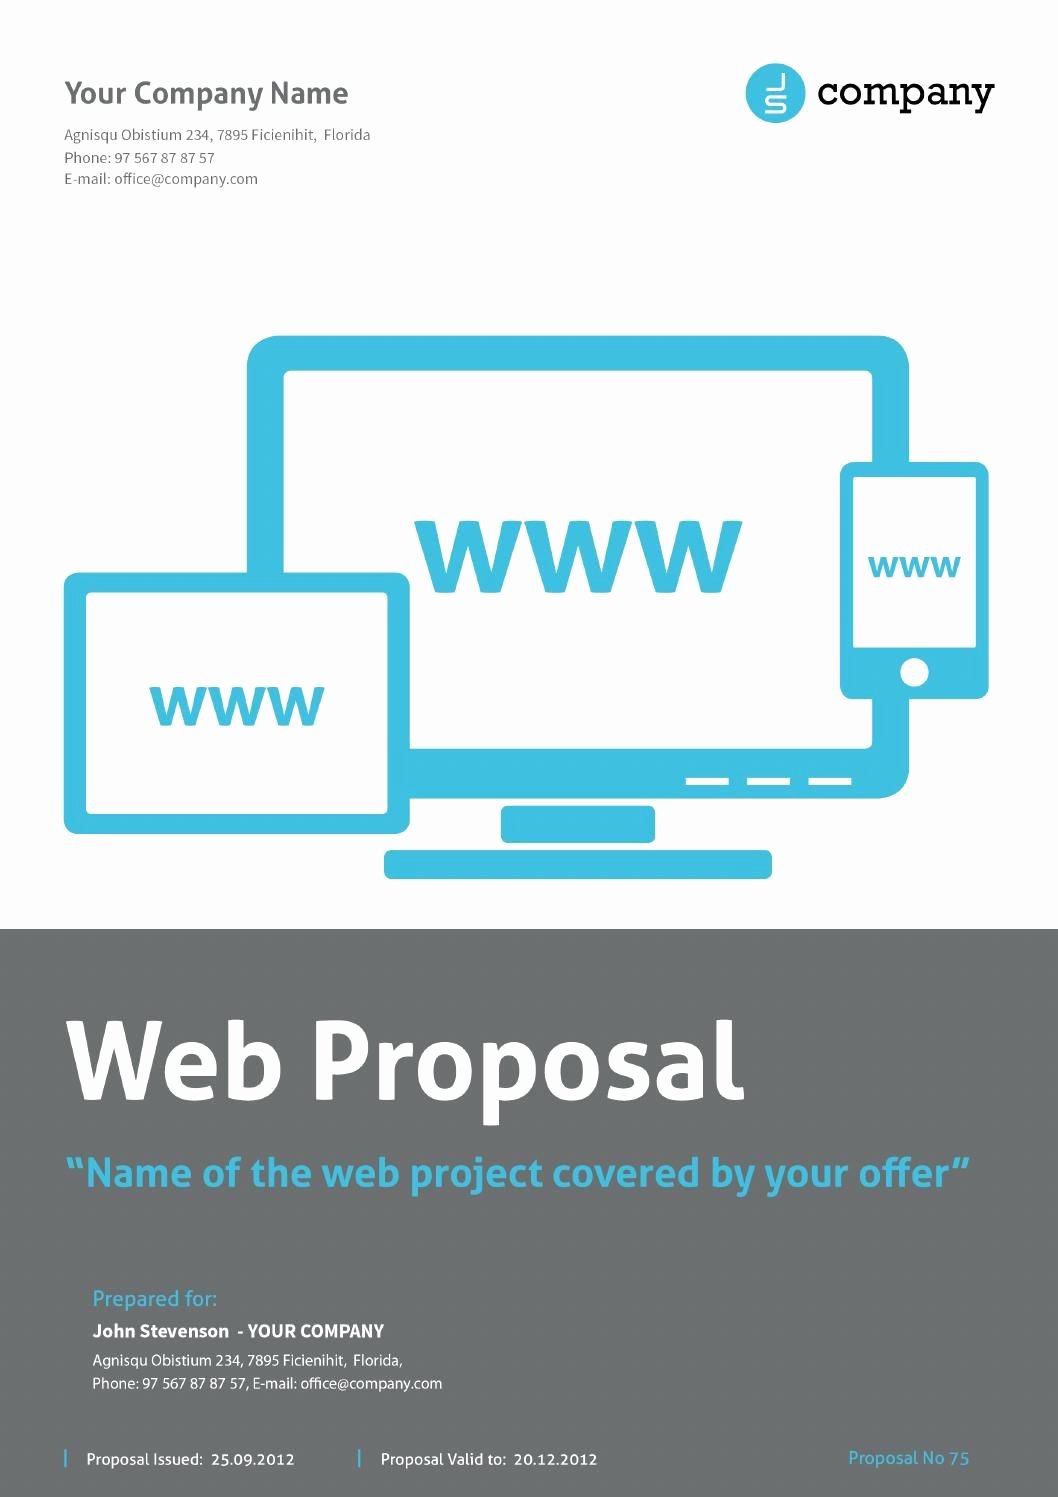 Website Proposal Template Word Unique Web Proposal by Paulnomade Documents